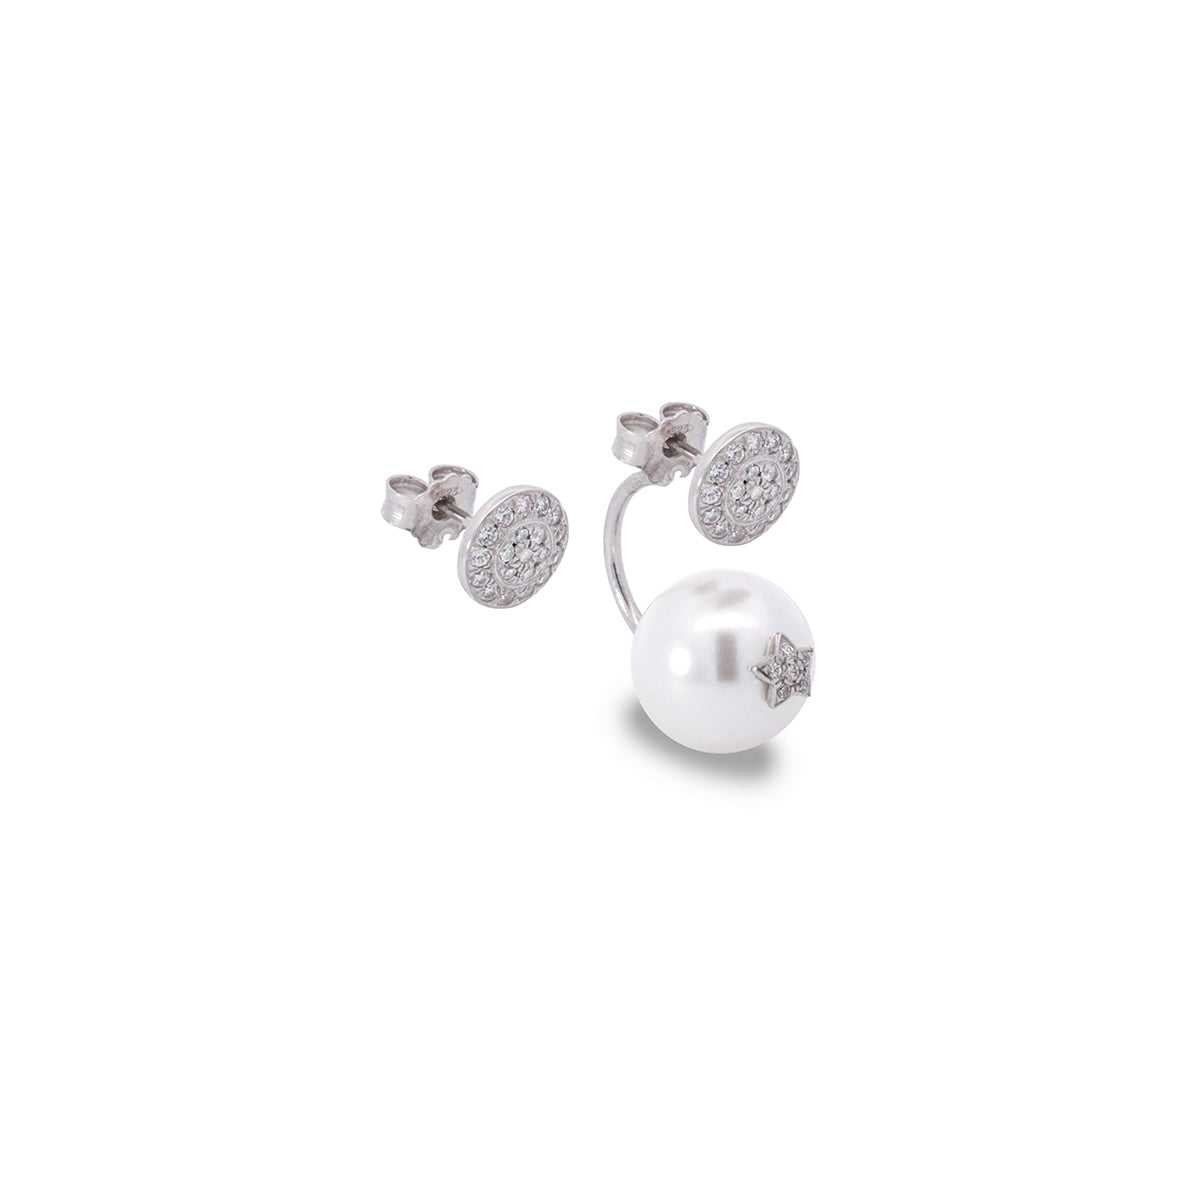 PEARL AND BUTTON ASYMMETRIC EARRINGS - GALACTICA ICE